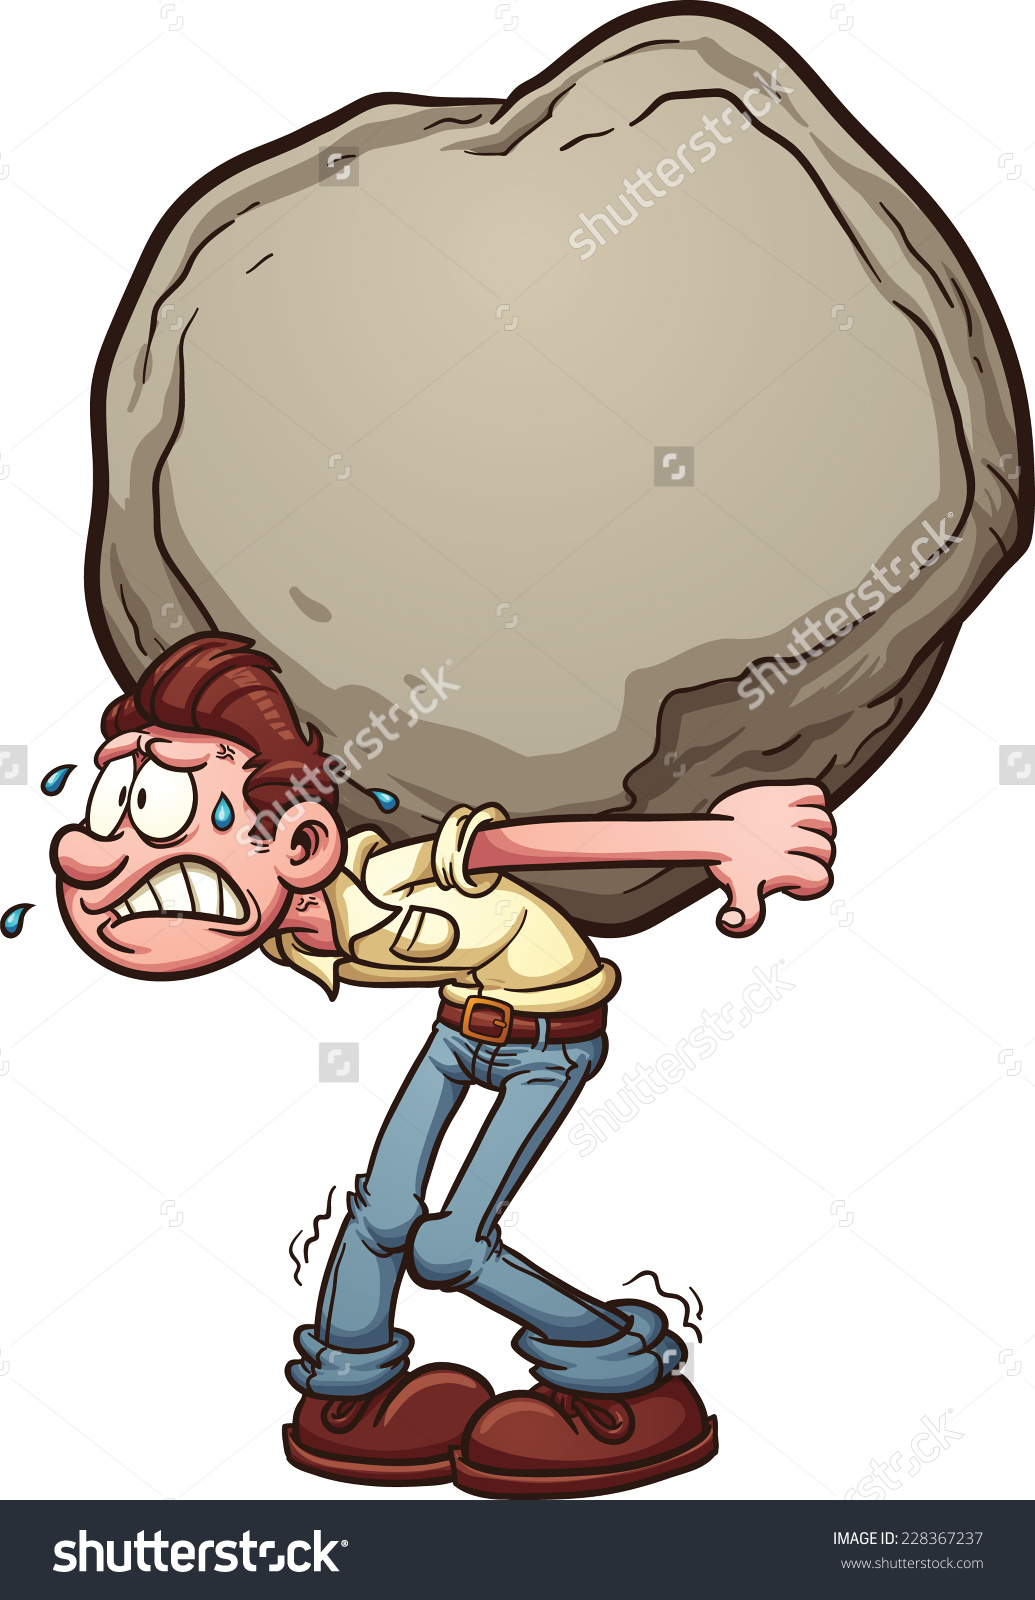 People holding something heavy clipart.